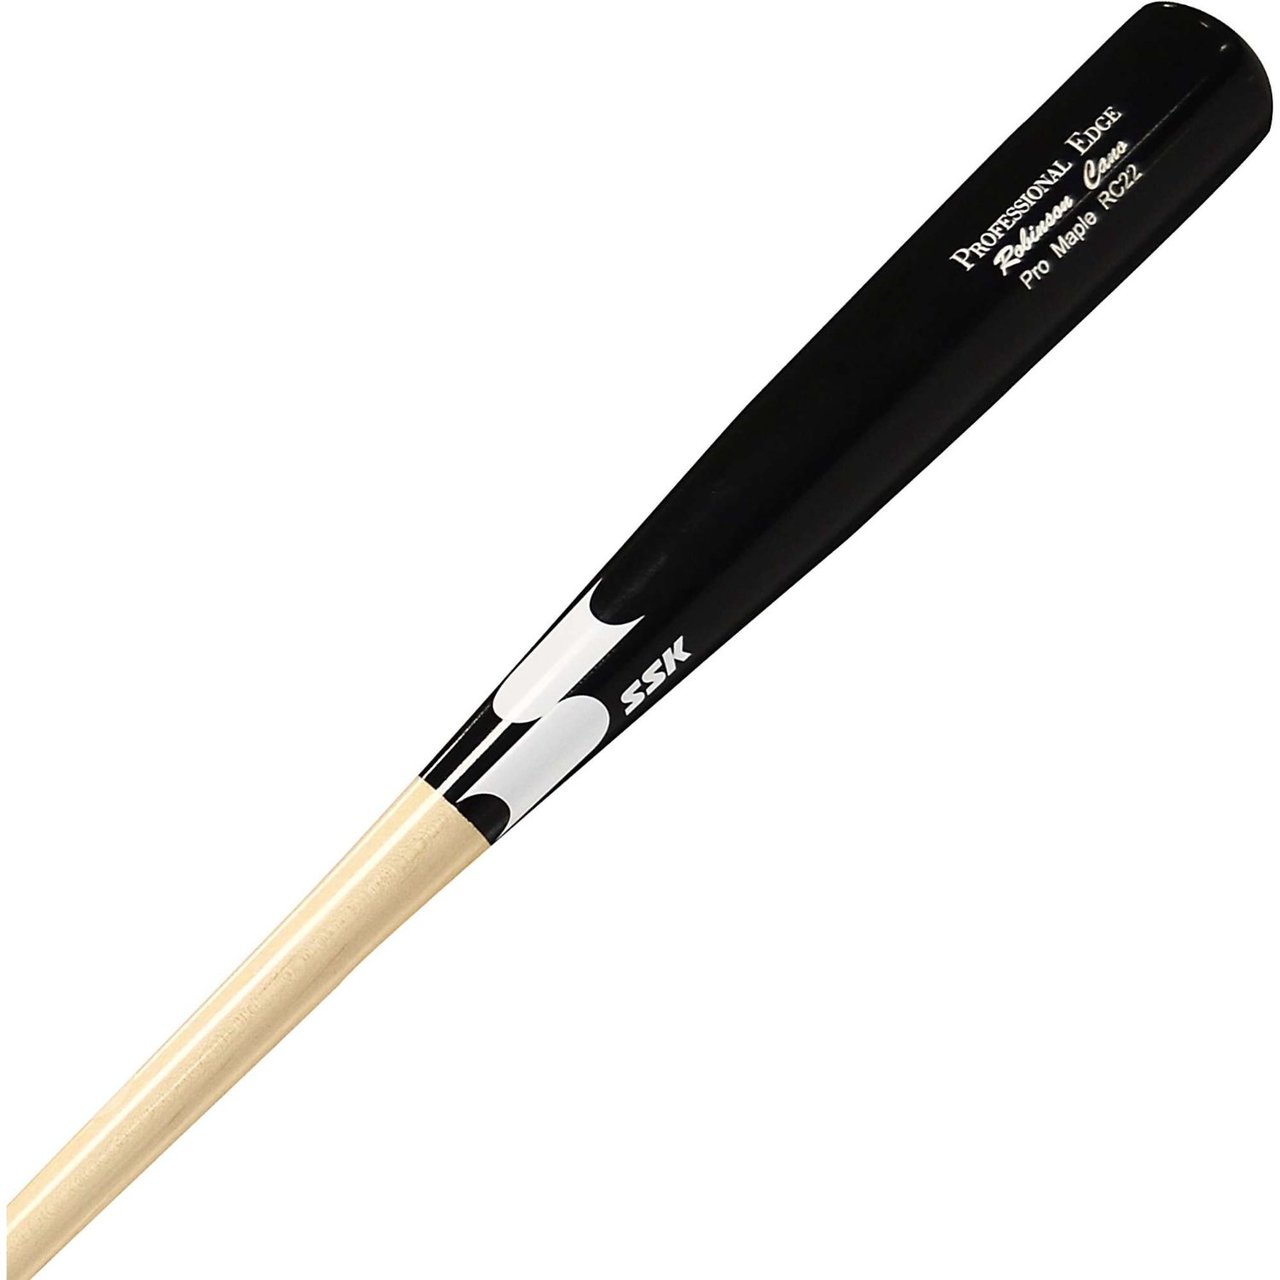 The SSK RC22 32 inch Professional Edge maple wood bat from SSK is made from North American Maple for extreme hardness and durability. It has a 2932 inch handdle and a traditional knob. The RC22 has a 2.53 inch barrel and is cupped on the end. All SSK bats are ink dot certified to show the straightness of the wood grain. The RC22 features a classic natural handle and black barrel finish. Professional players around the world use SSK bats. For over 50 years SSK has been bringing players cutting edge bat and glove designs. 